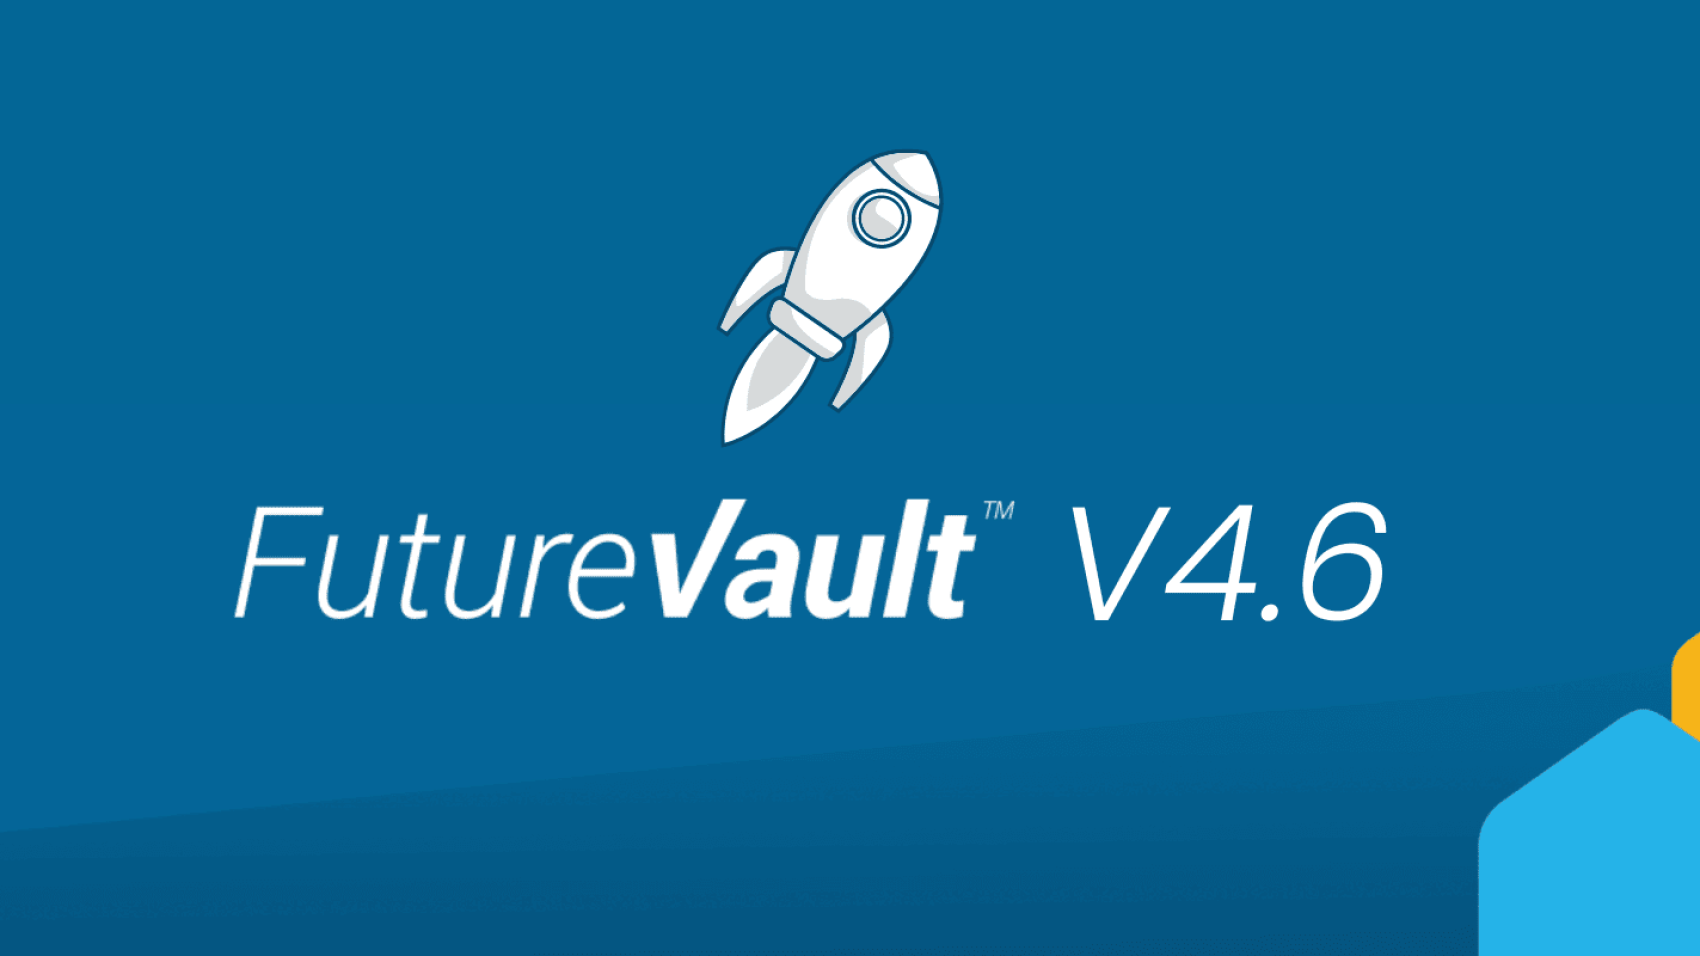 FutureVault Version 4.6 Product Release Notes